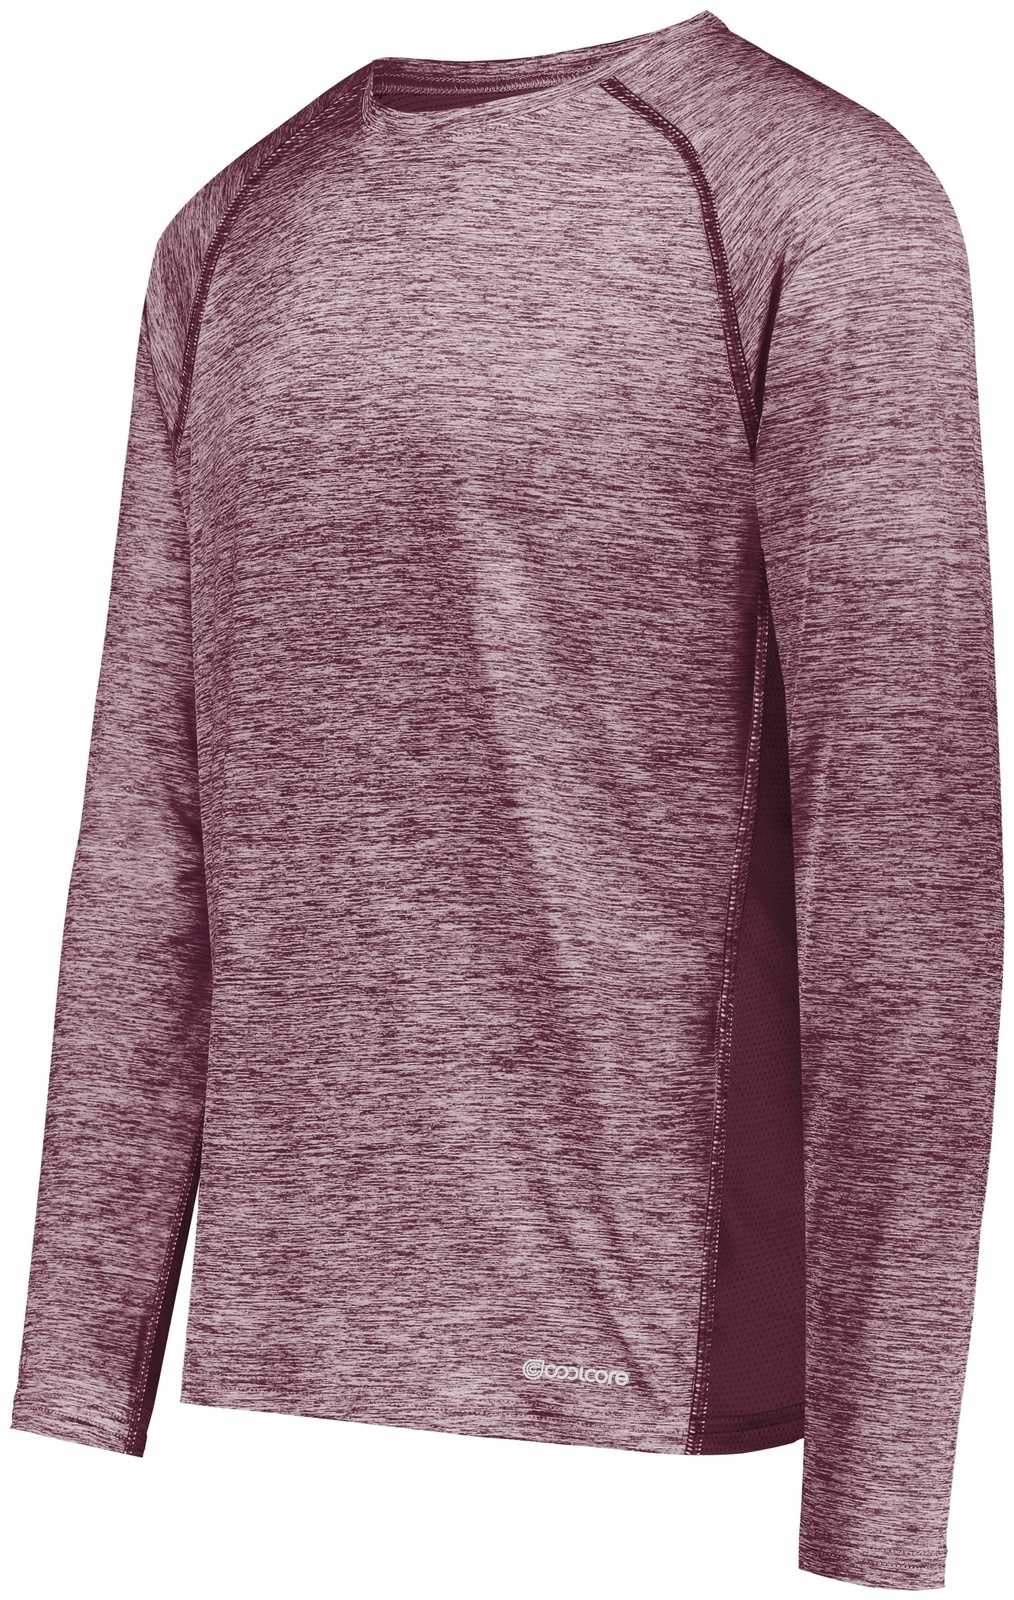 Holloway 222570 Electrify CoolCore Long Sleeve T-Shirt - Maroon Heather - HIT a Double